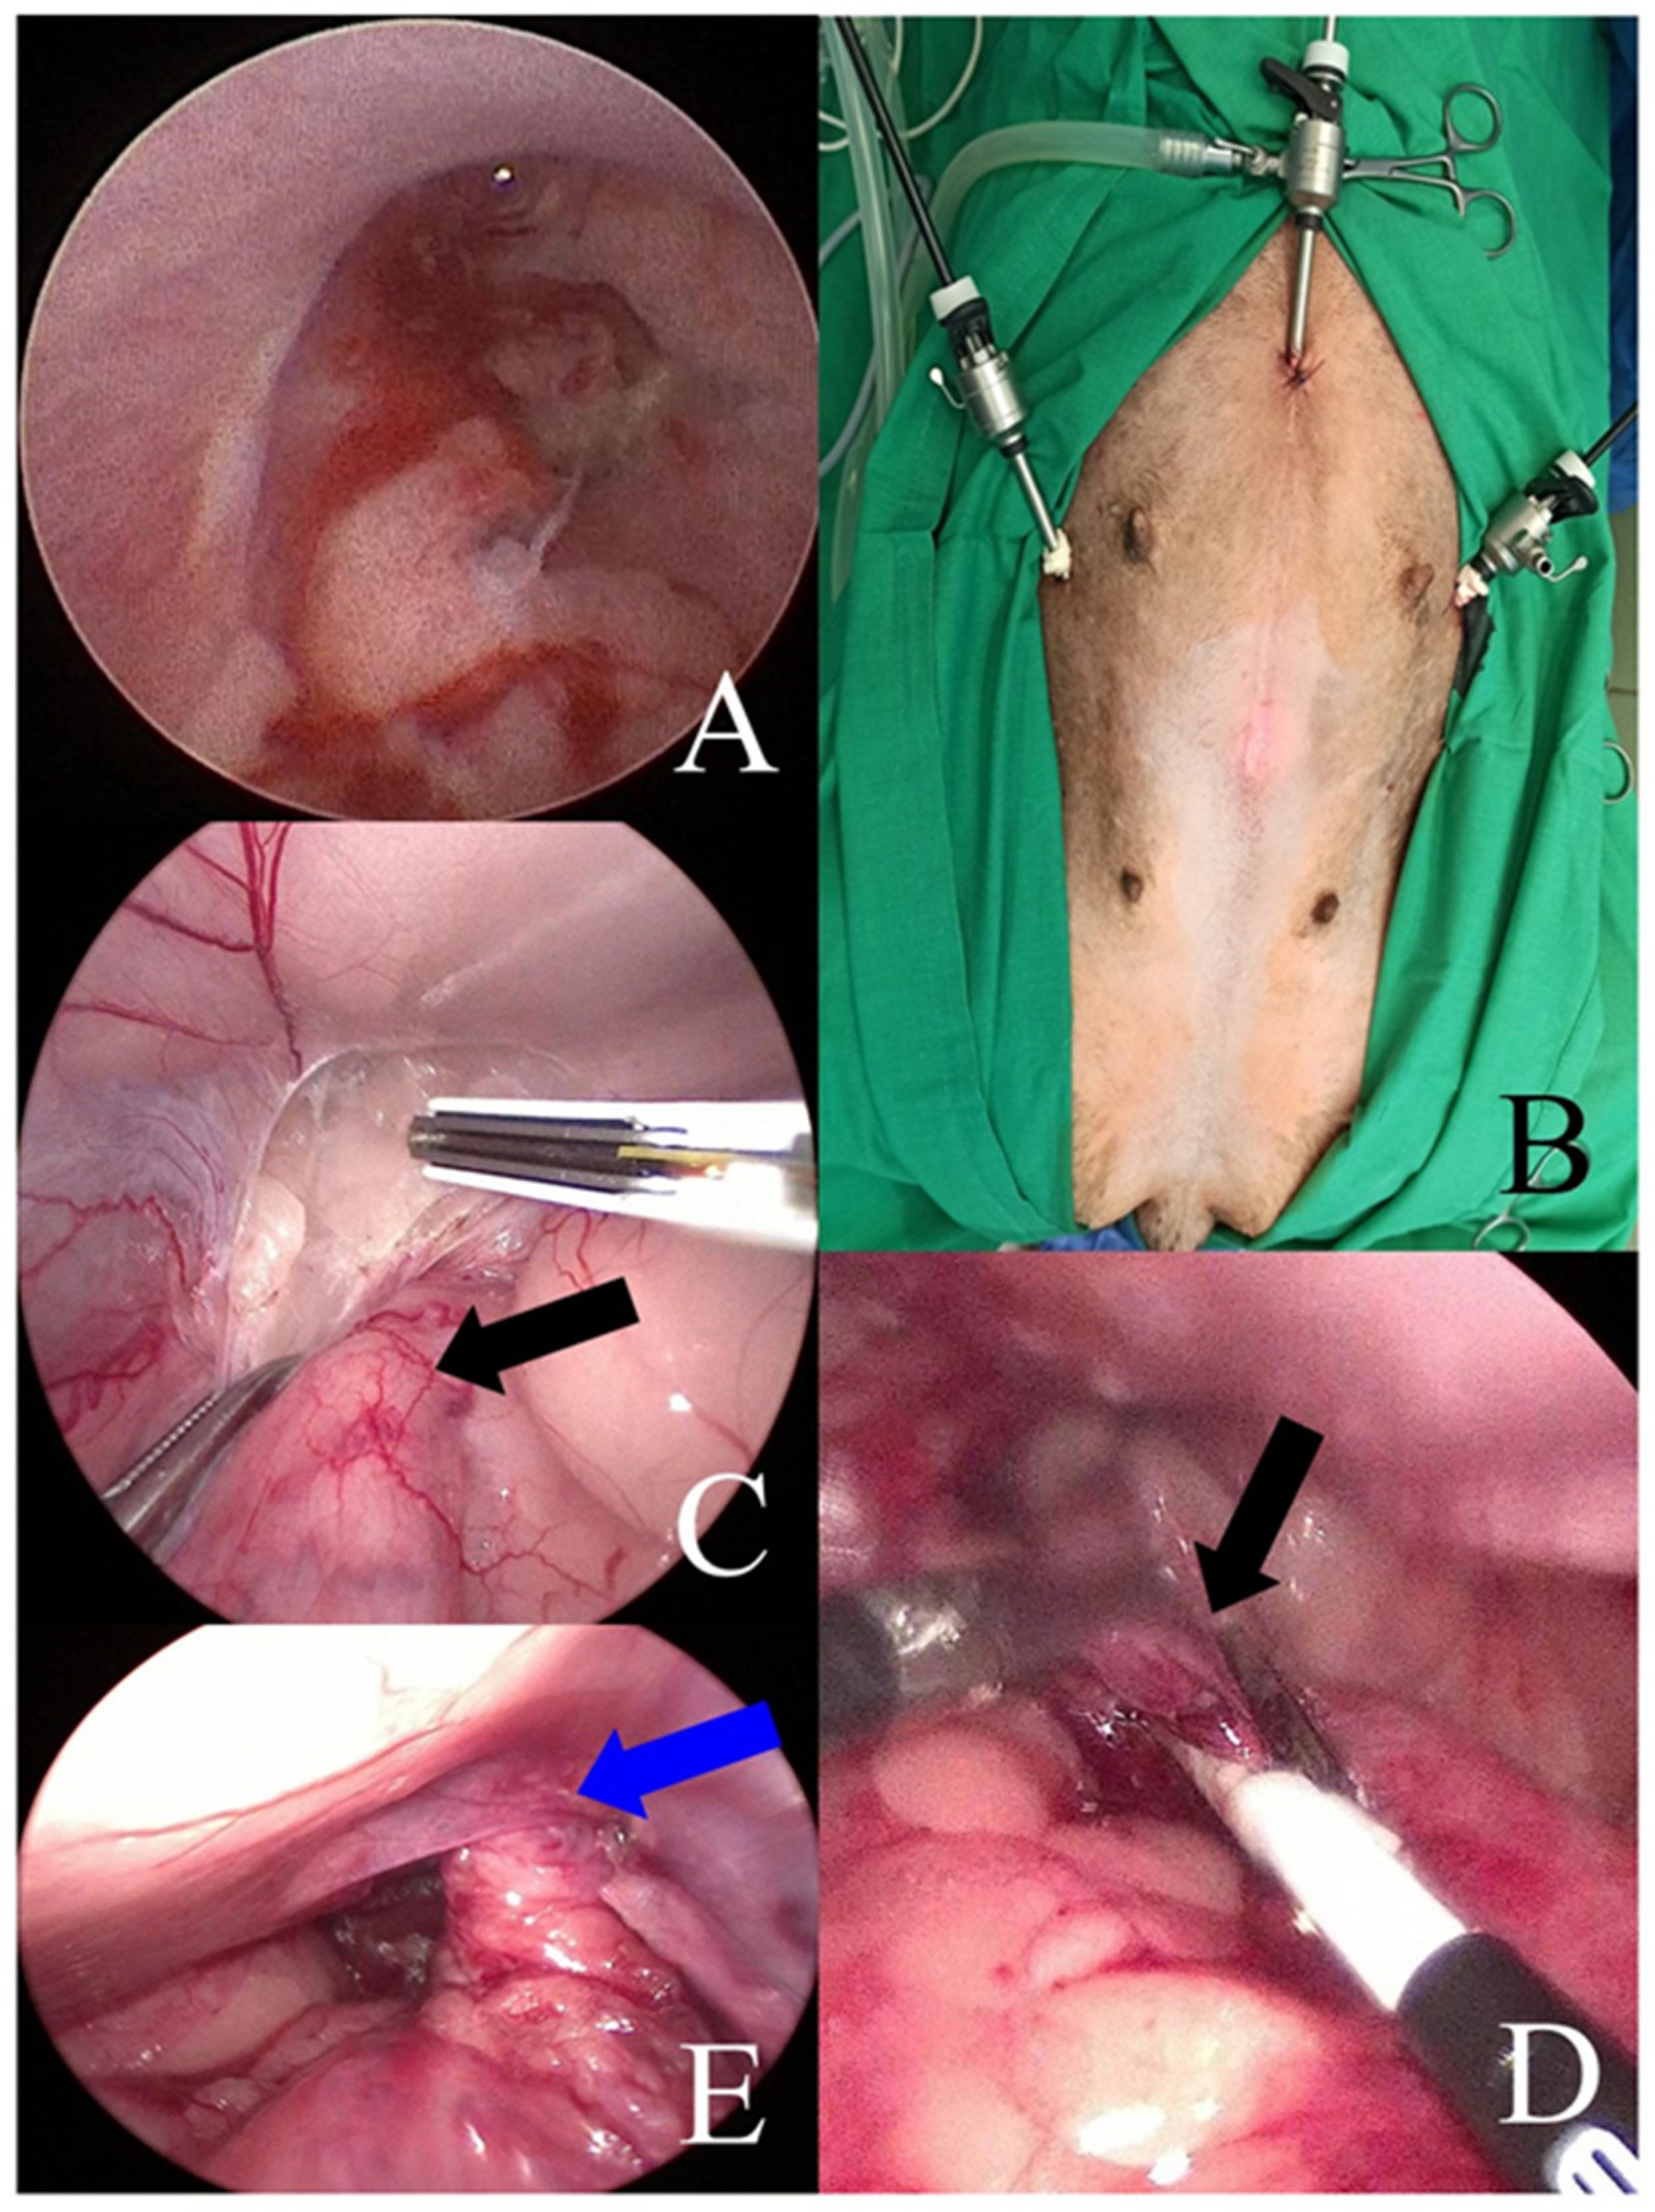 PDF) Surgical management of recurrent rectal prolapse in a pup by colopexy